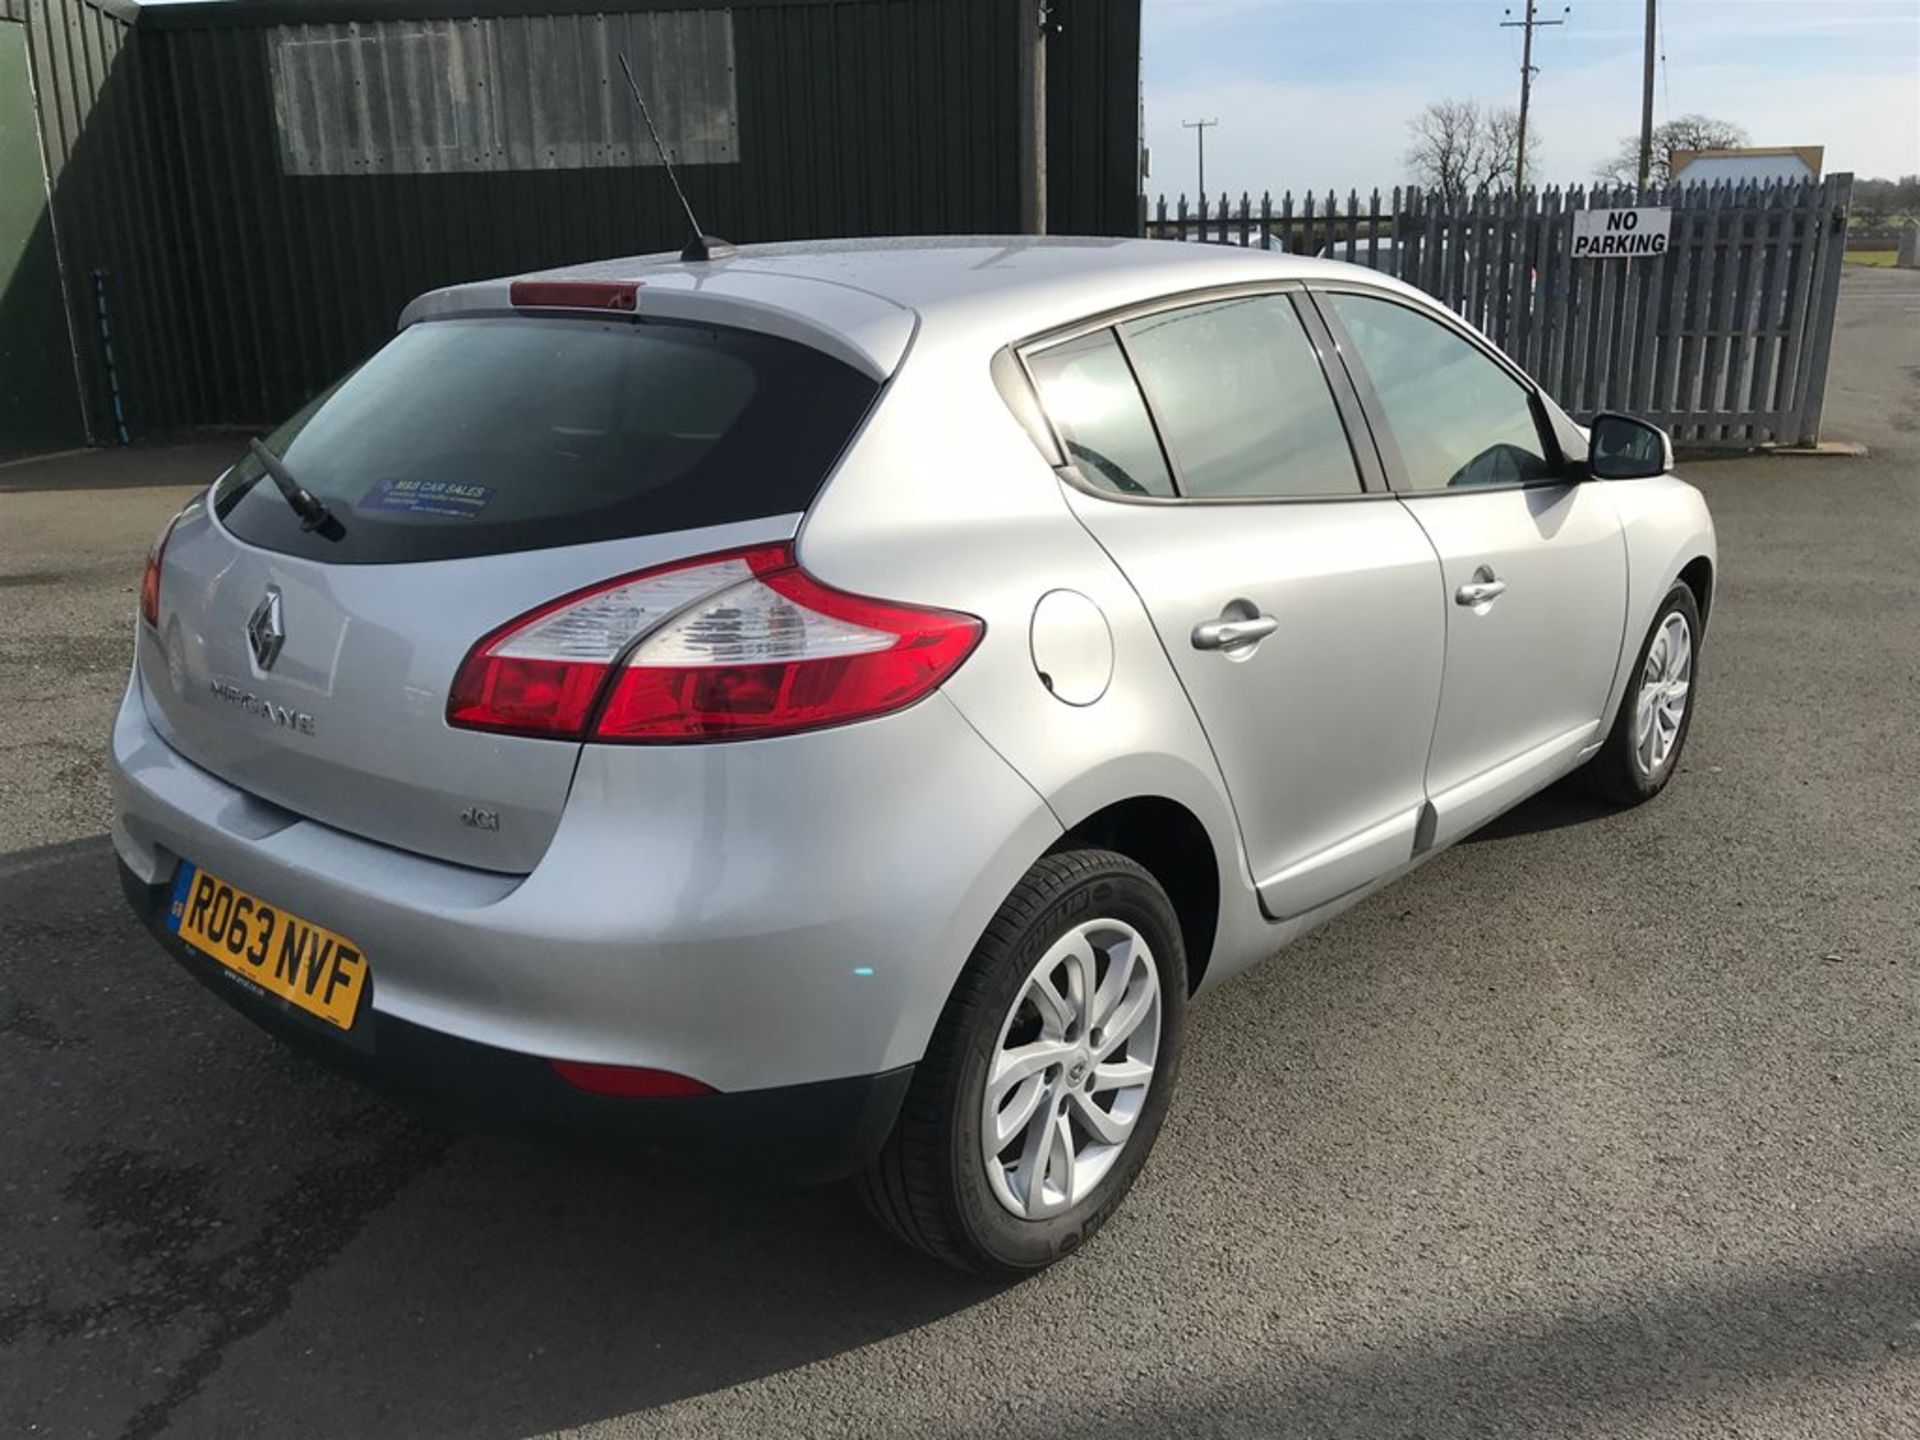 Renault Megane 1.5 dCi Limited Energy 110ps 5dr - Image 6 of 8